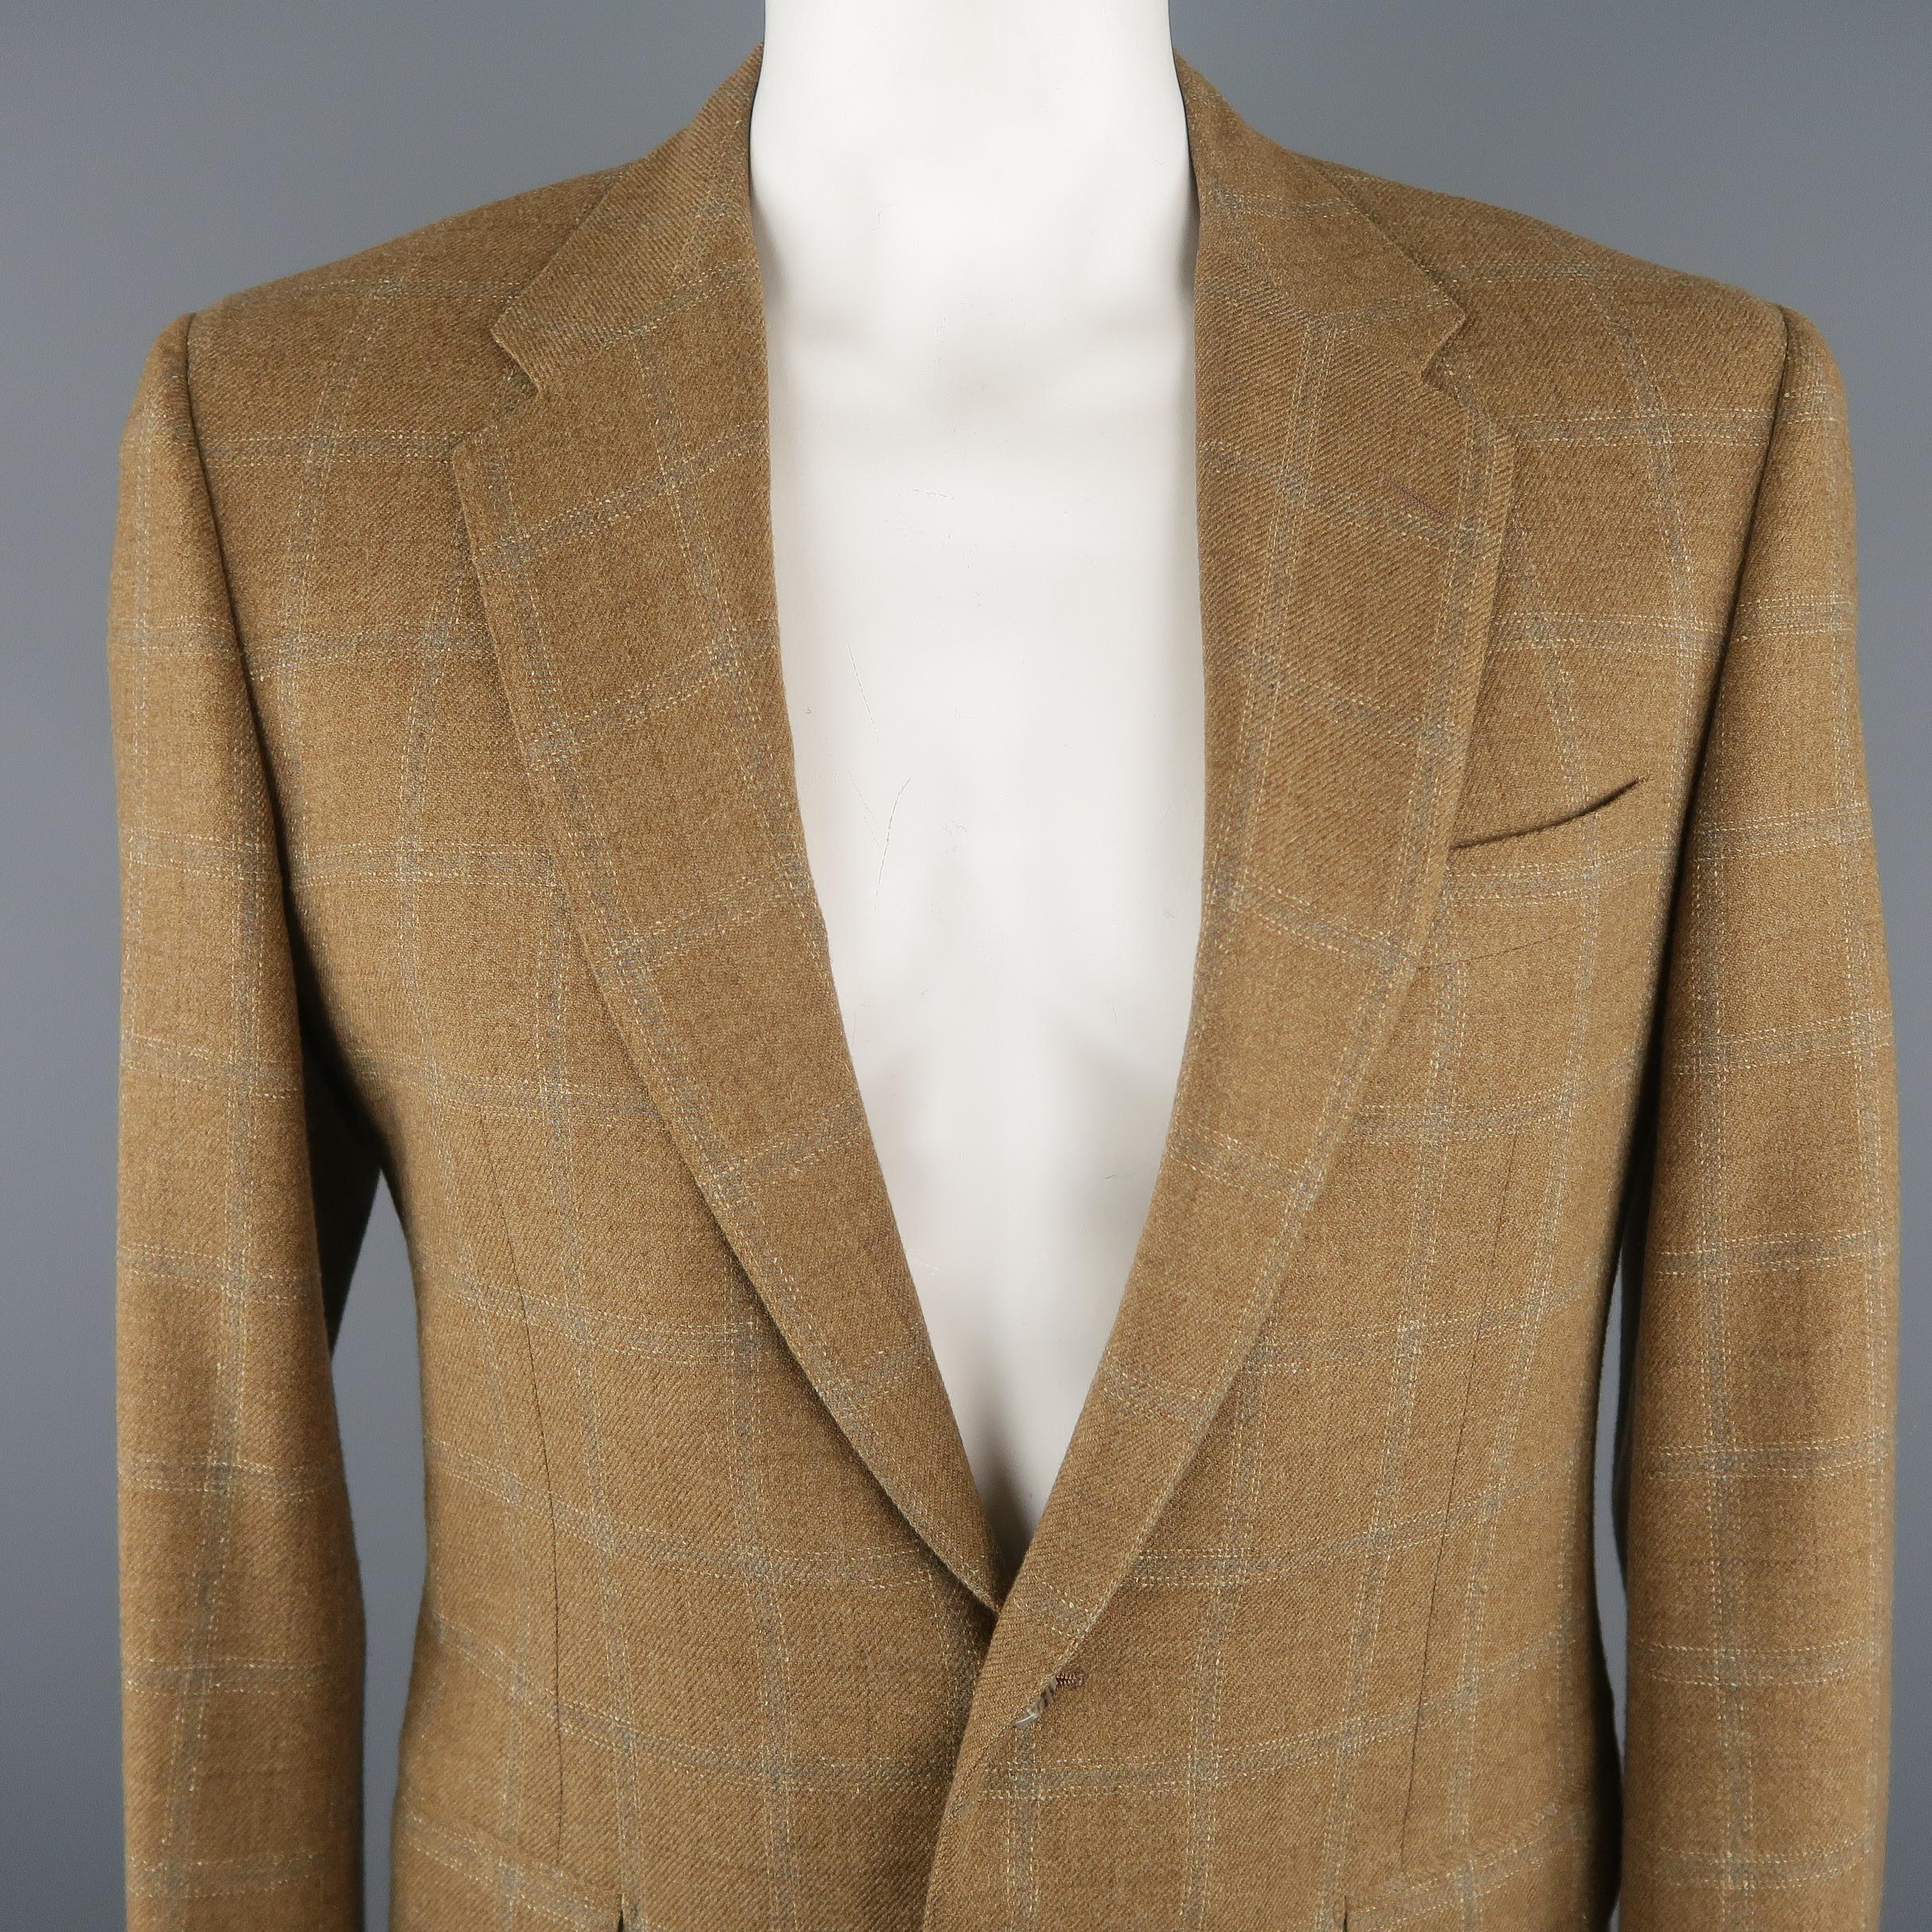 CORNELIANI blazer comes in a tan tone in a window pane wool / cashmere material, featuring a notch lapel, slit and flap pockets, 2 buttons closure, single breasted and a regular fit. Made in Italy.
 
Excellent Pre-Owned Condition.
Marked: 50R IT
